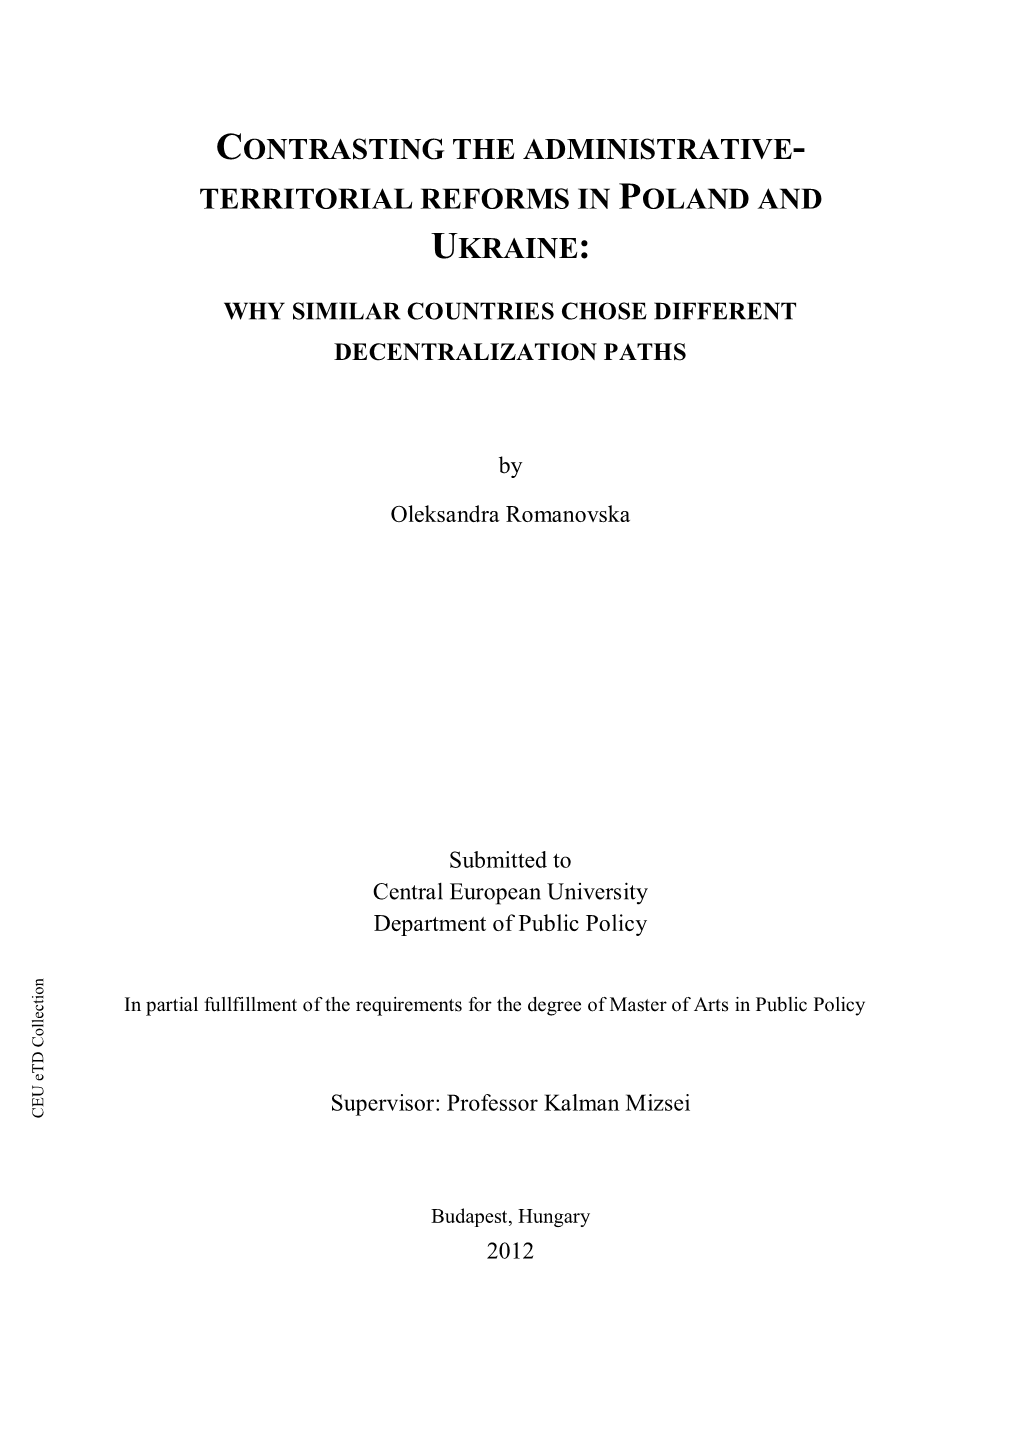 Contrasting the Administrative-Territorial Reforms in Poland and Ukraine